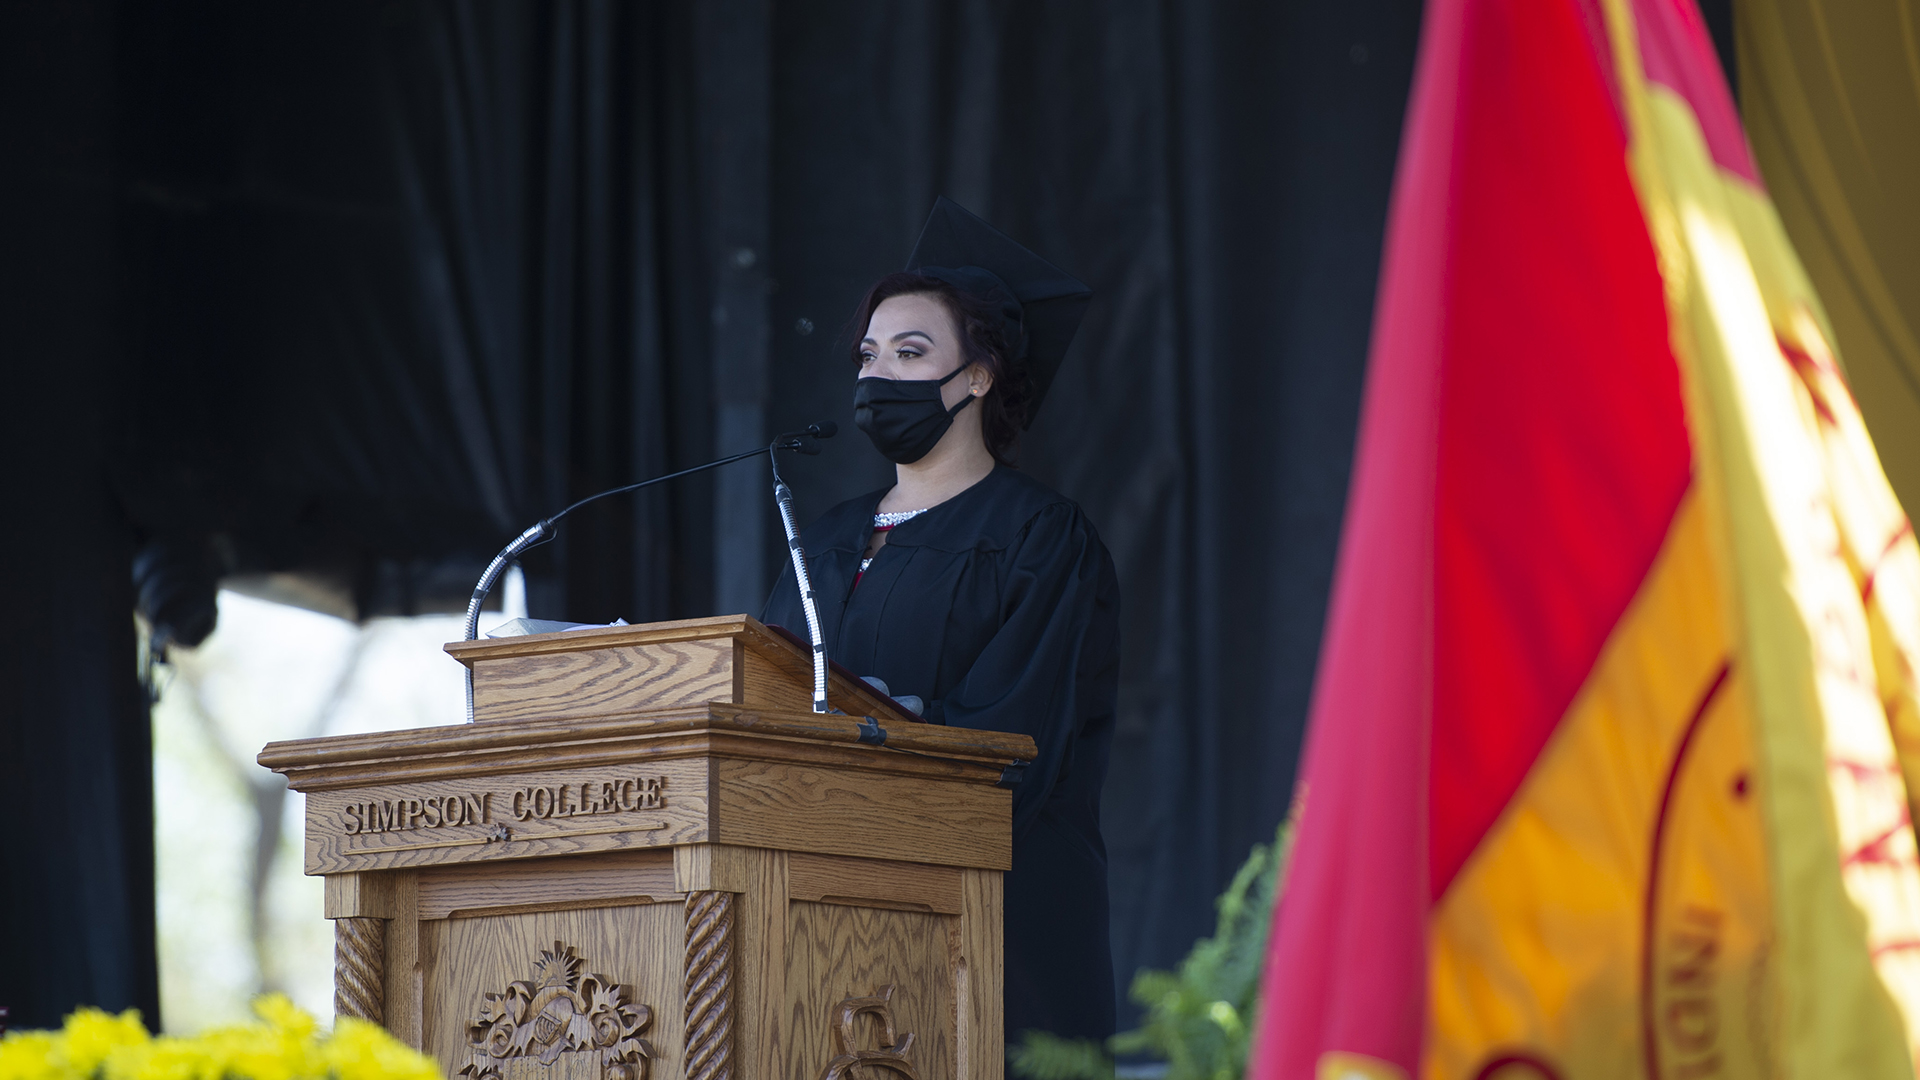 Simpson College graduate Elizabeth Castillo ’20 delivers the continuing and graduate address at the 2021 morning commencement ceremony.